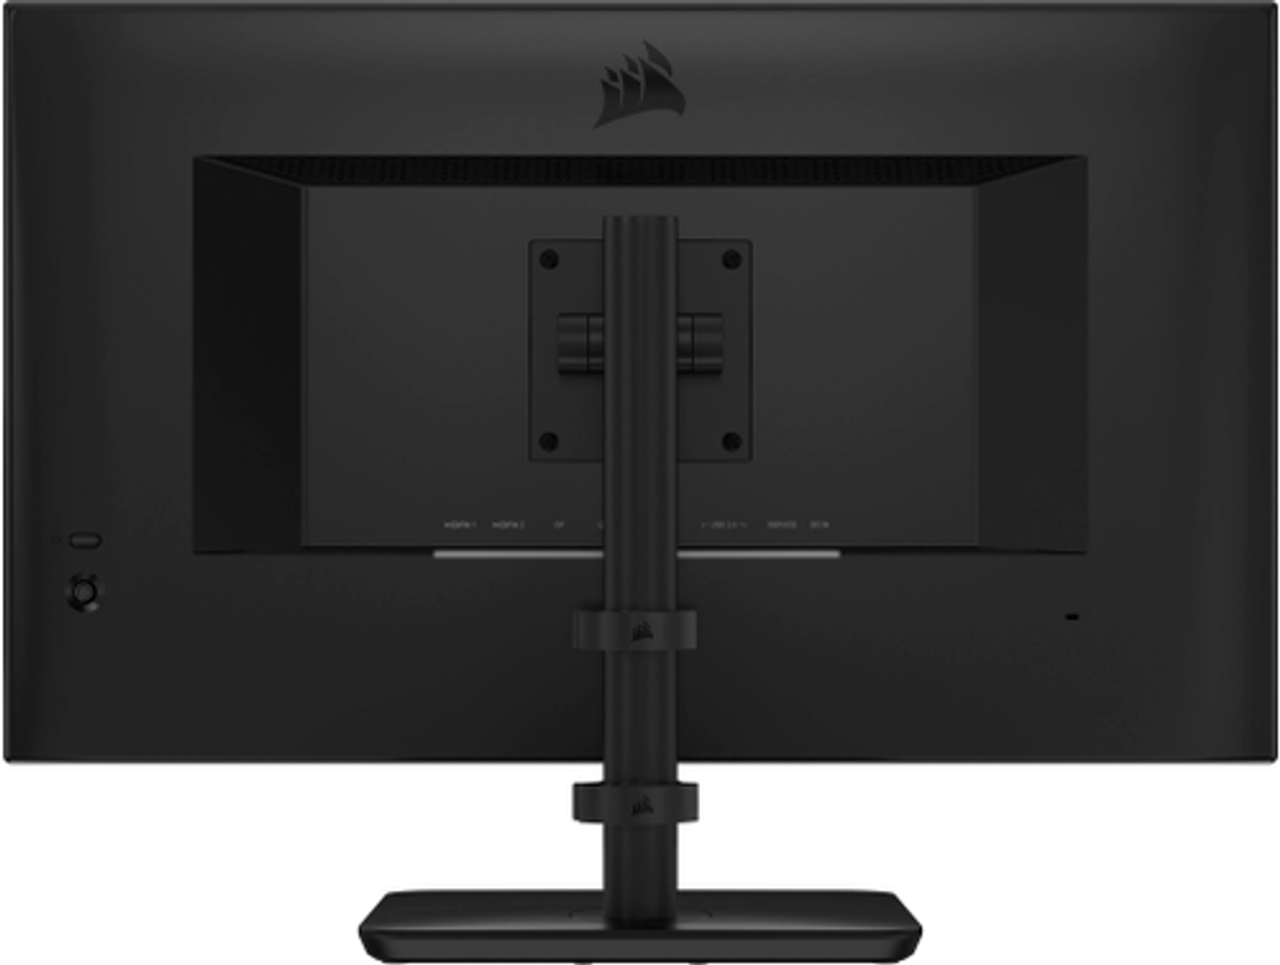 CORSAIR - XENEON 32" LCD QHD 165Hz 1ms FreeSync and G-SYNC Compatible Gaming Monitor with HDR (HDMI, USB, DisplayPort) - Black